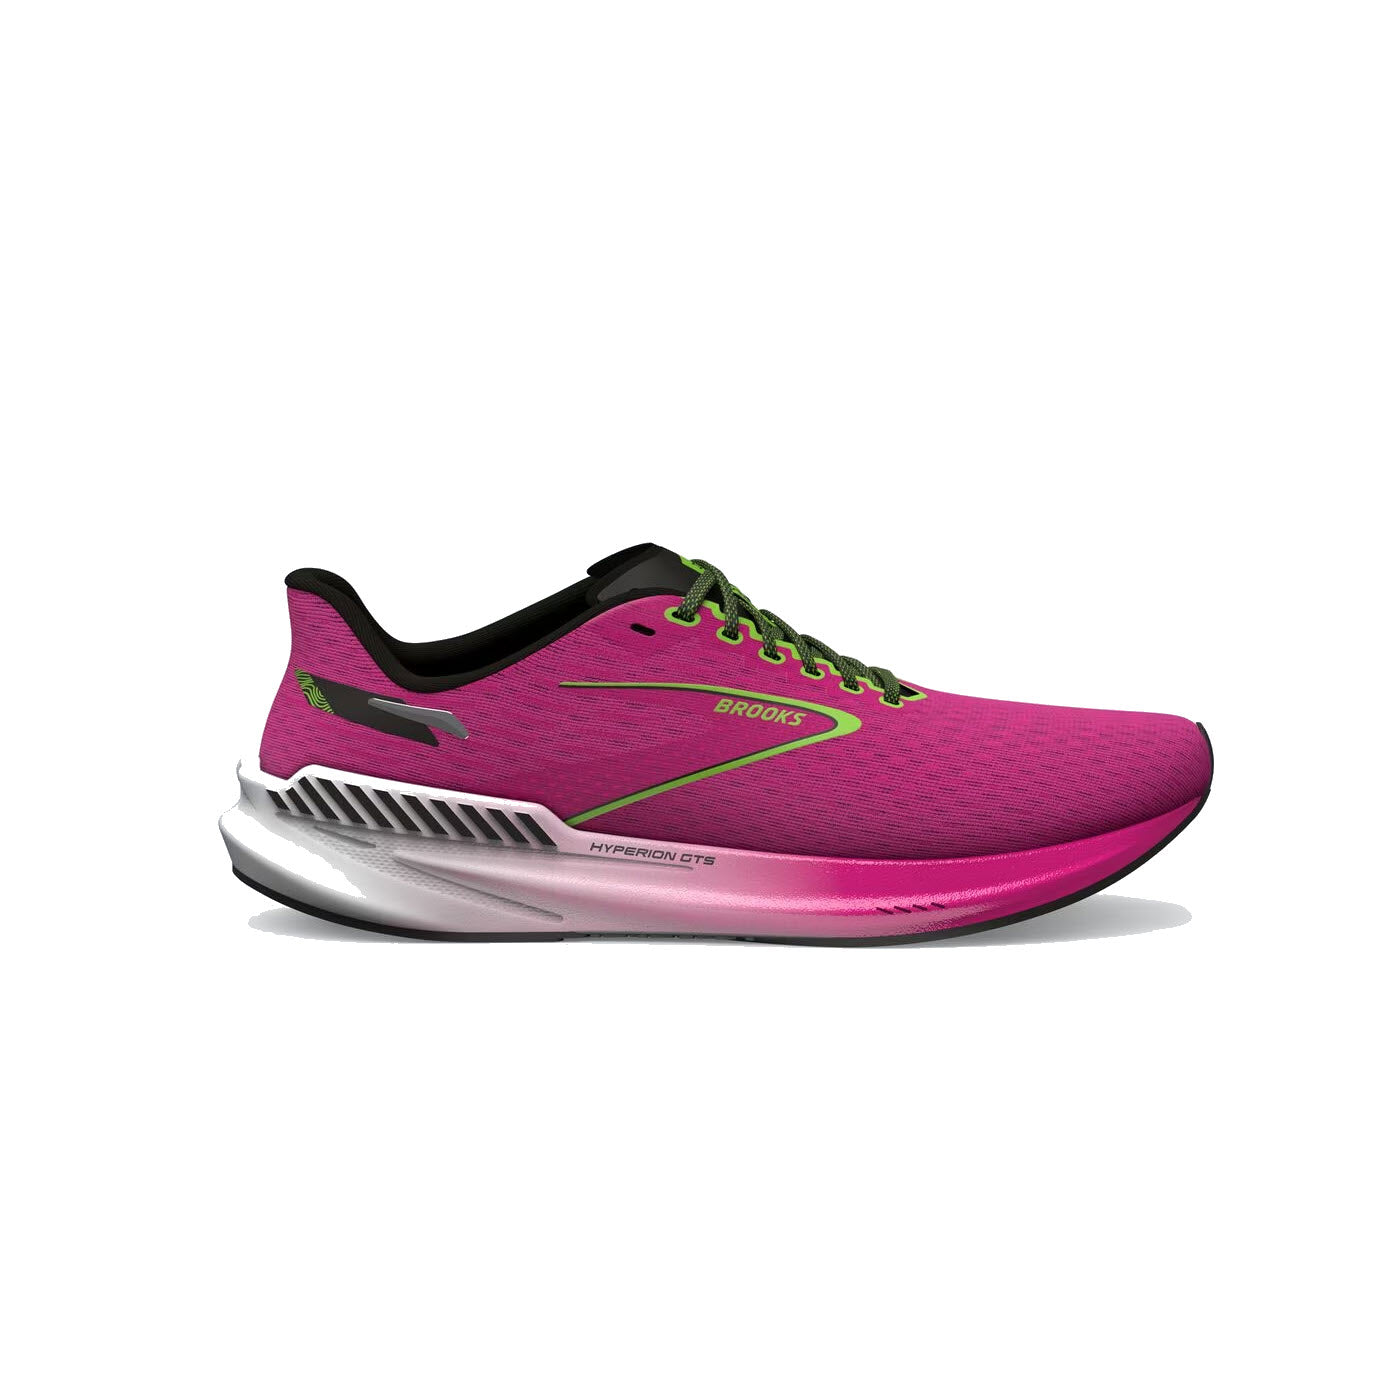 A pink Brooks Hyperion GTS running shoe featuring green laces and a white sole, isolated on a white background.